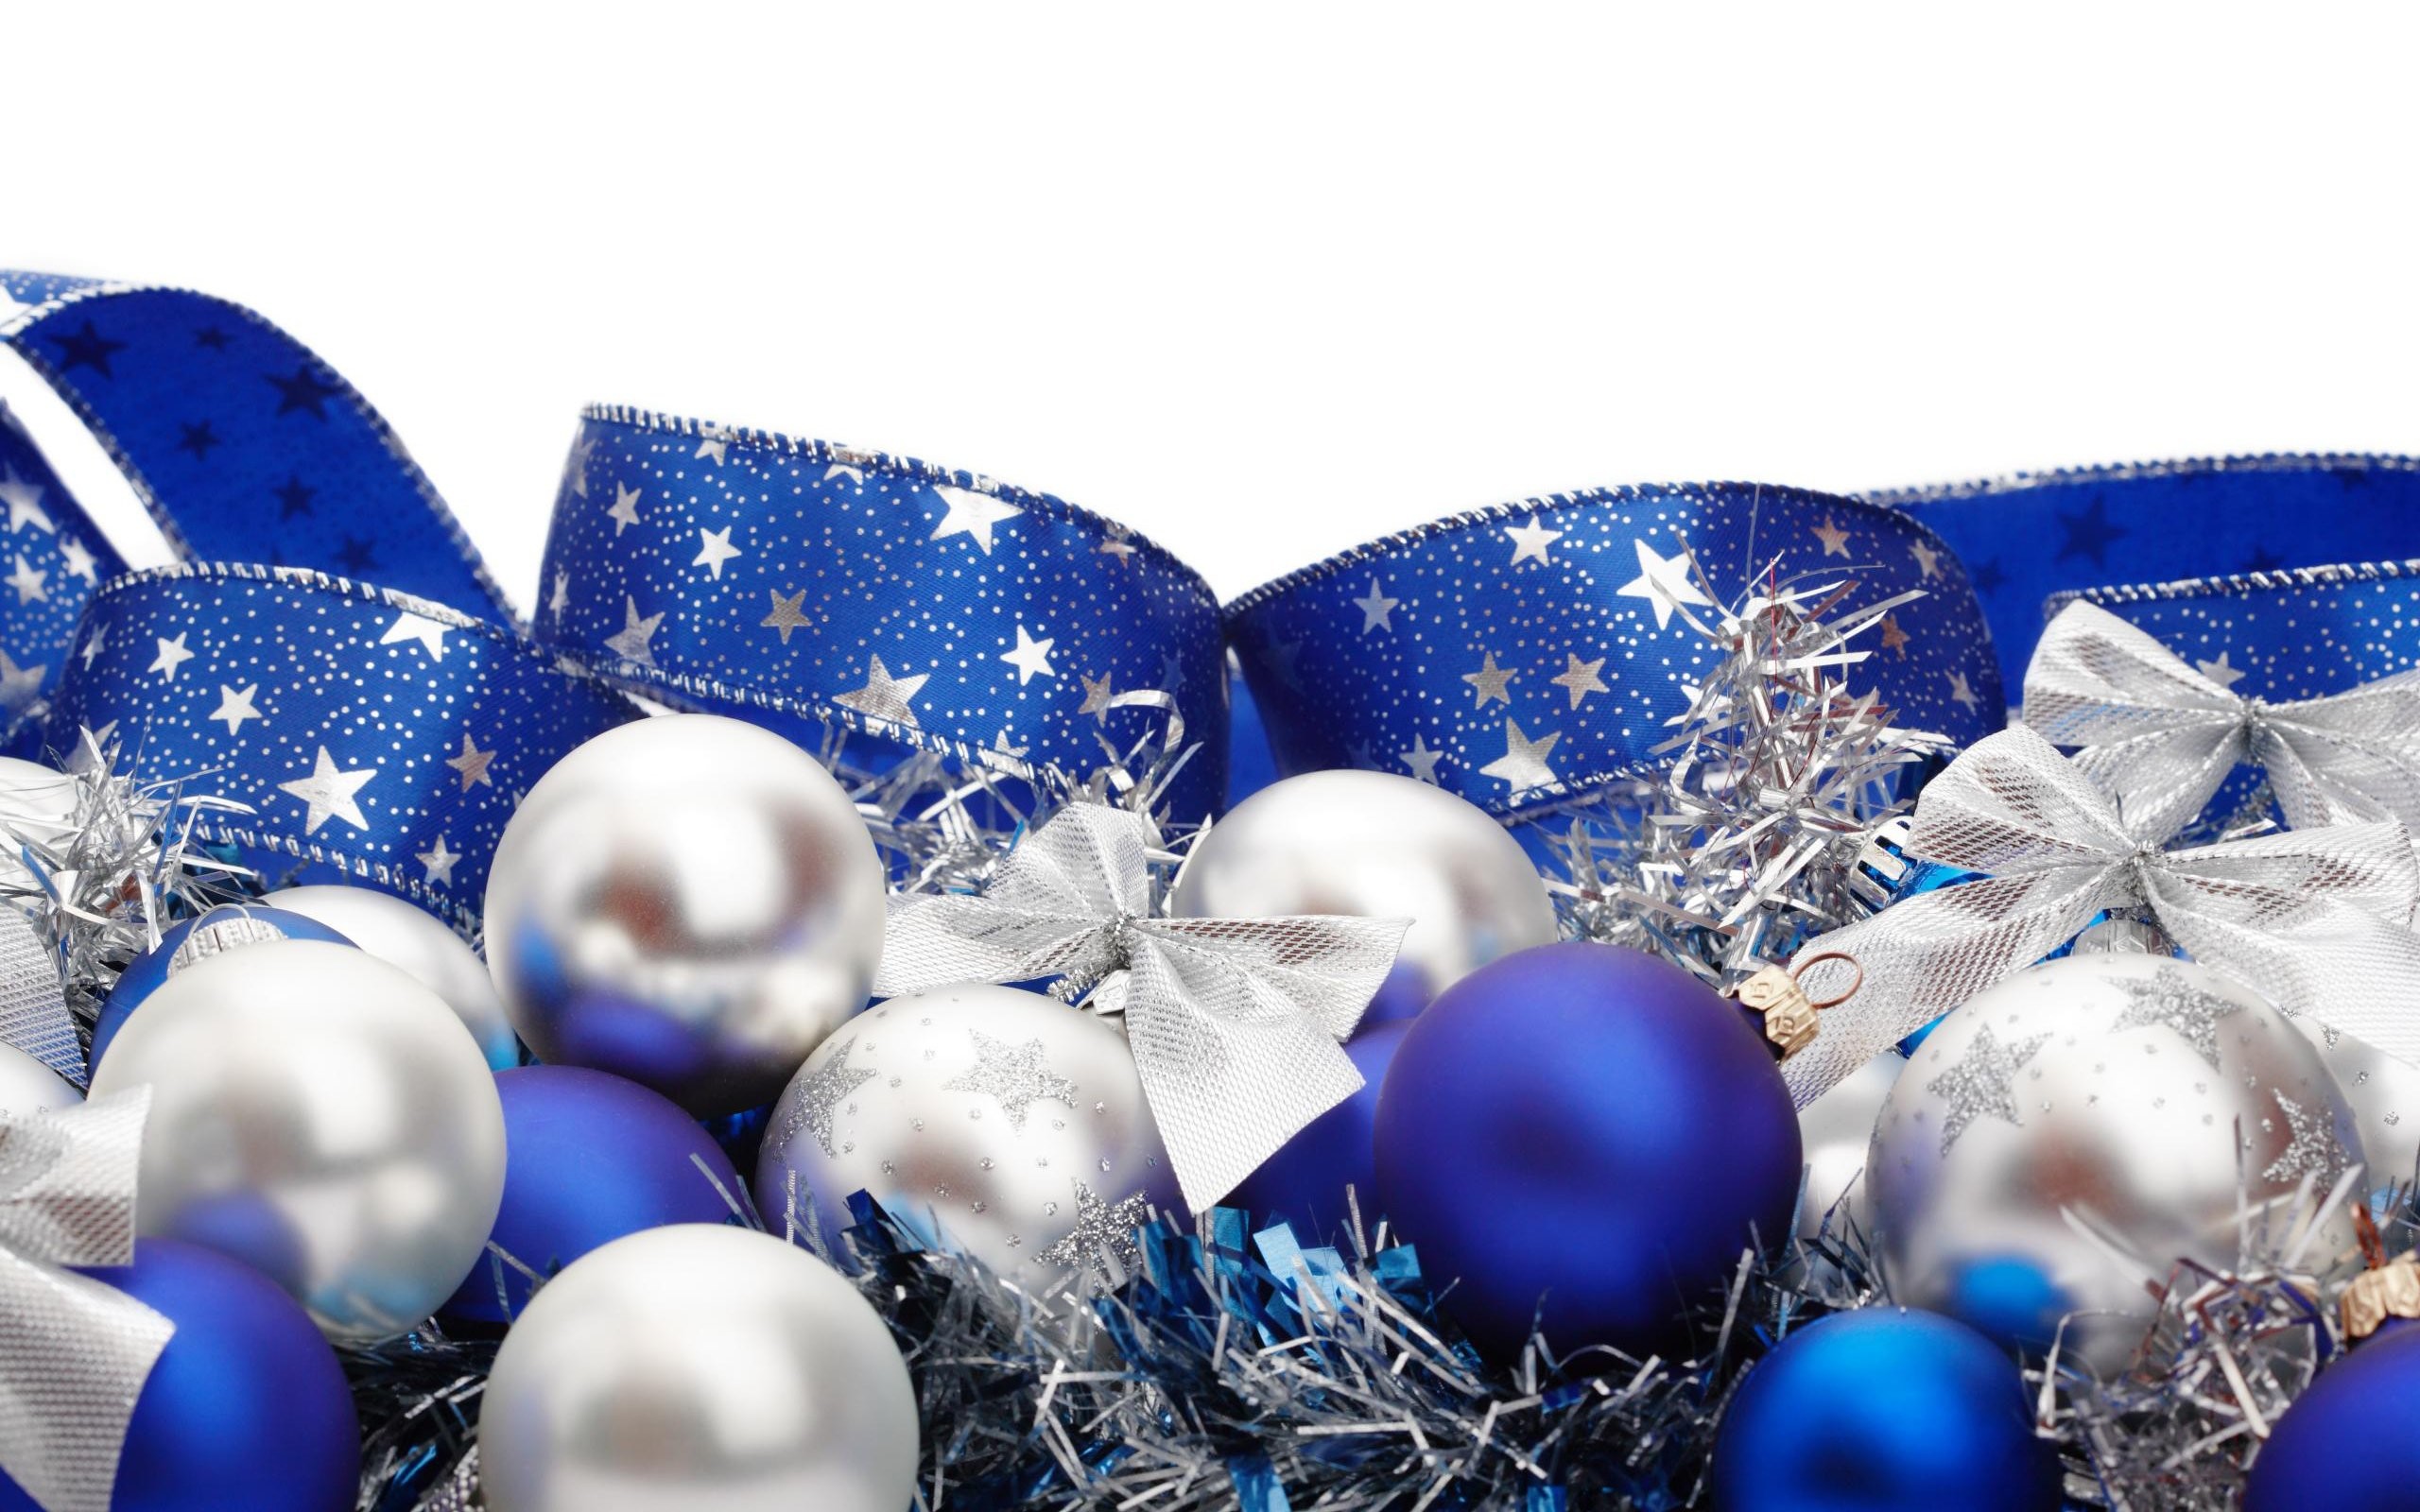 2560x1600 ... wallpaper cave; silver and blue christmas decorations walldevil ...